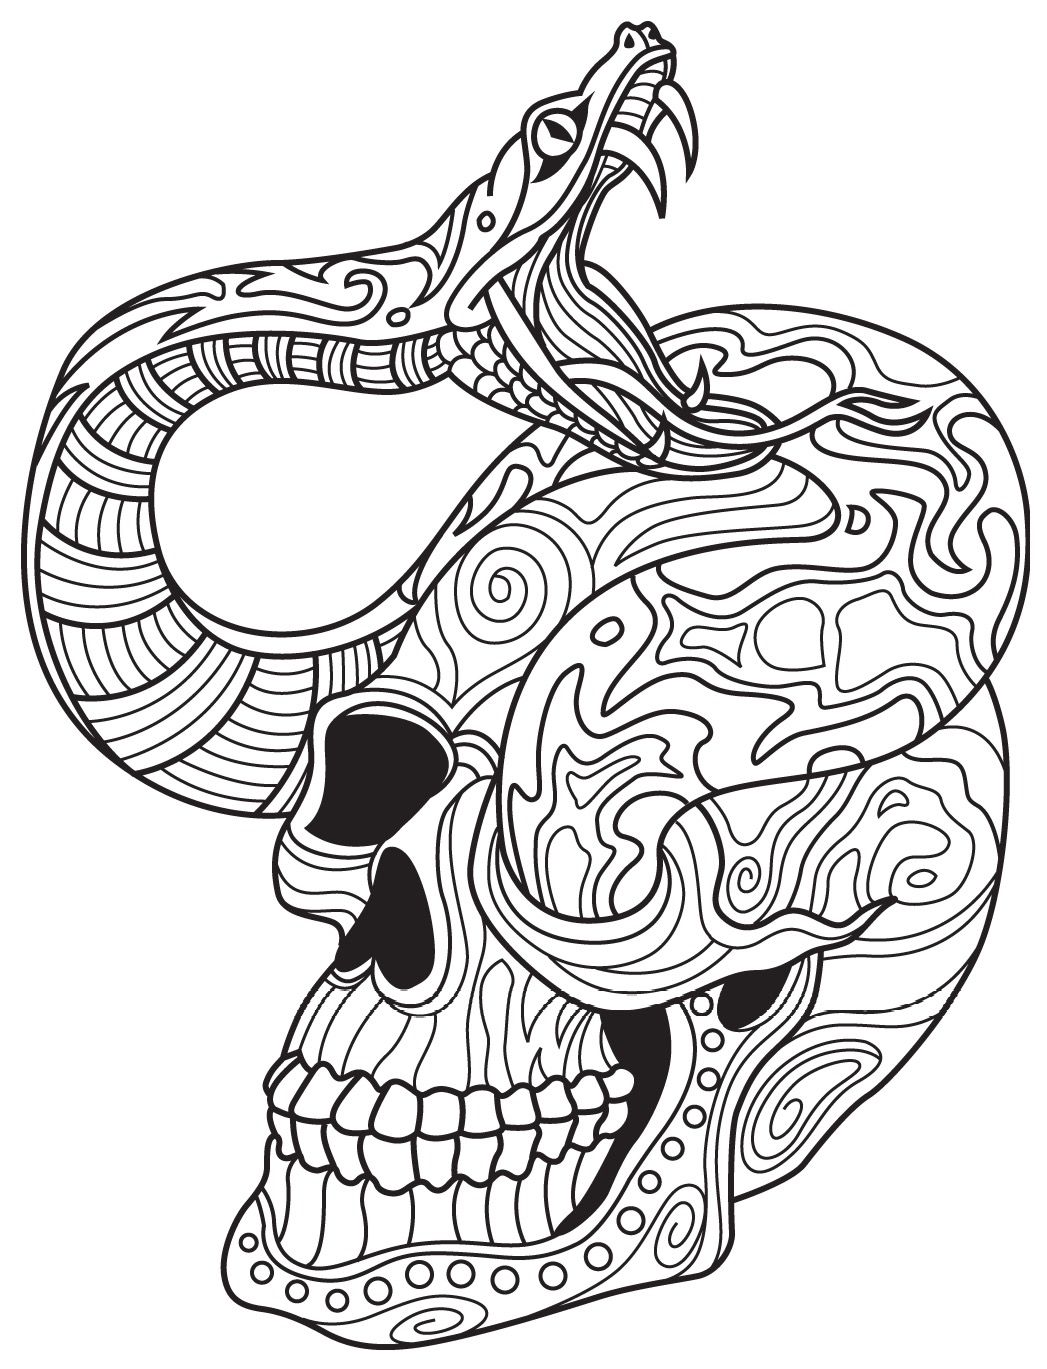 Snake And Skull   Colorish Coloring Book App For Adults By ...